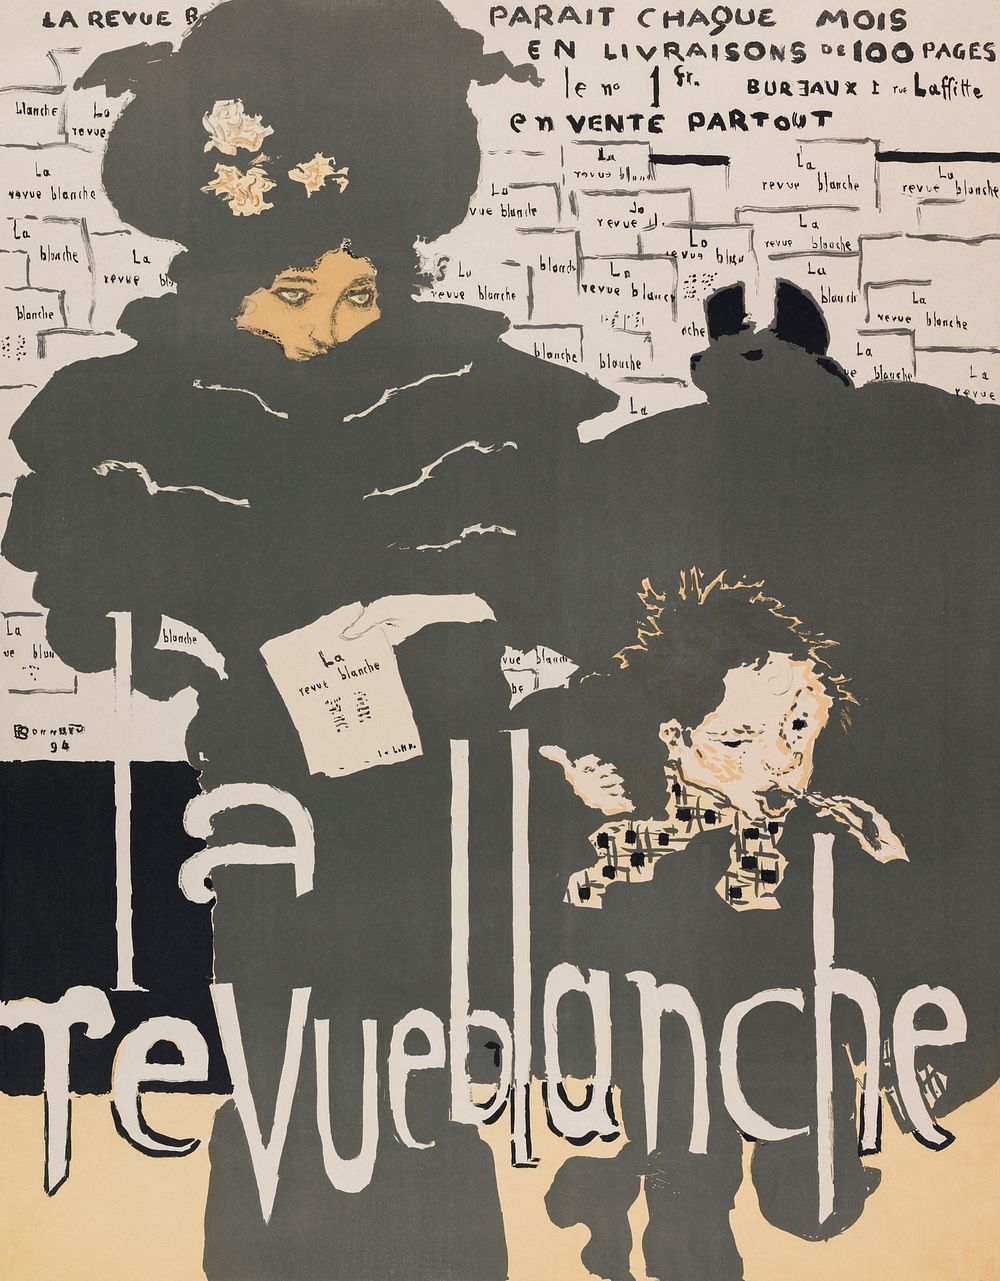 Poster for the "Revue Blanche" (1894) print in high resolution by Pierre Bonnard. Original from the Public Institution Paris…